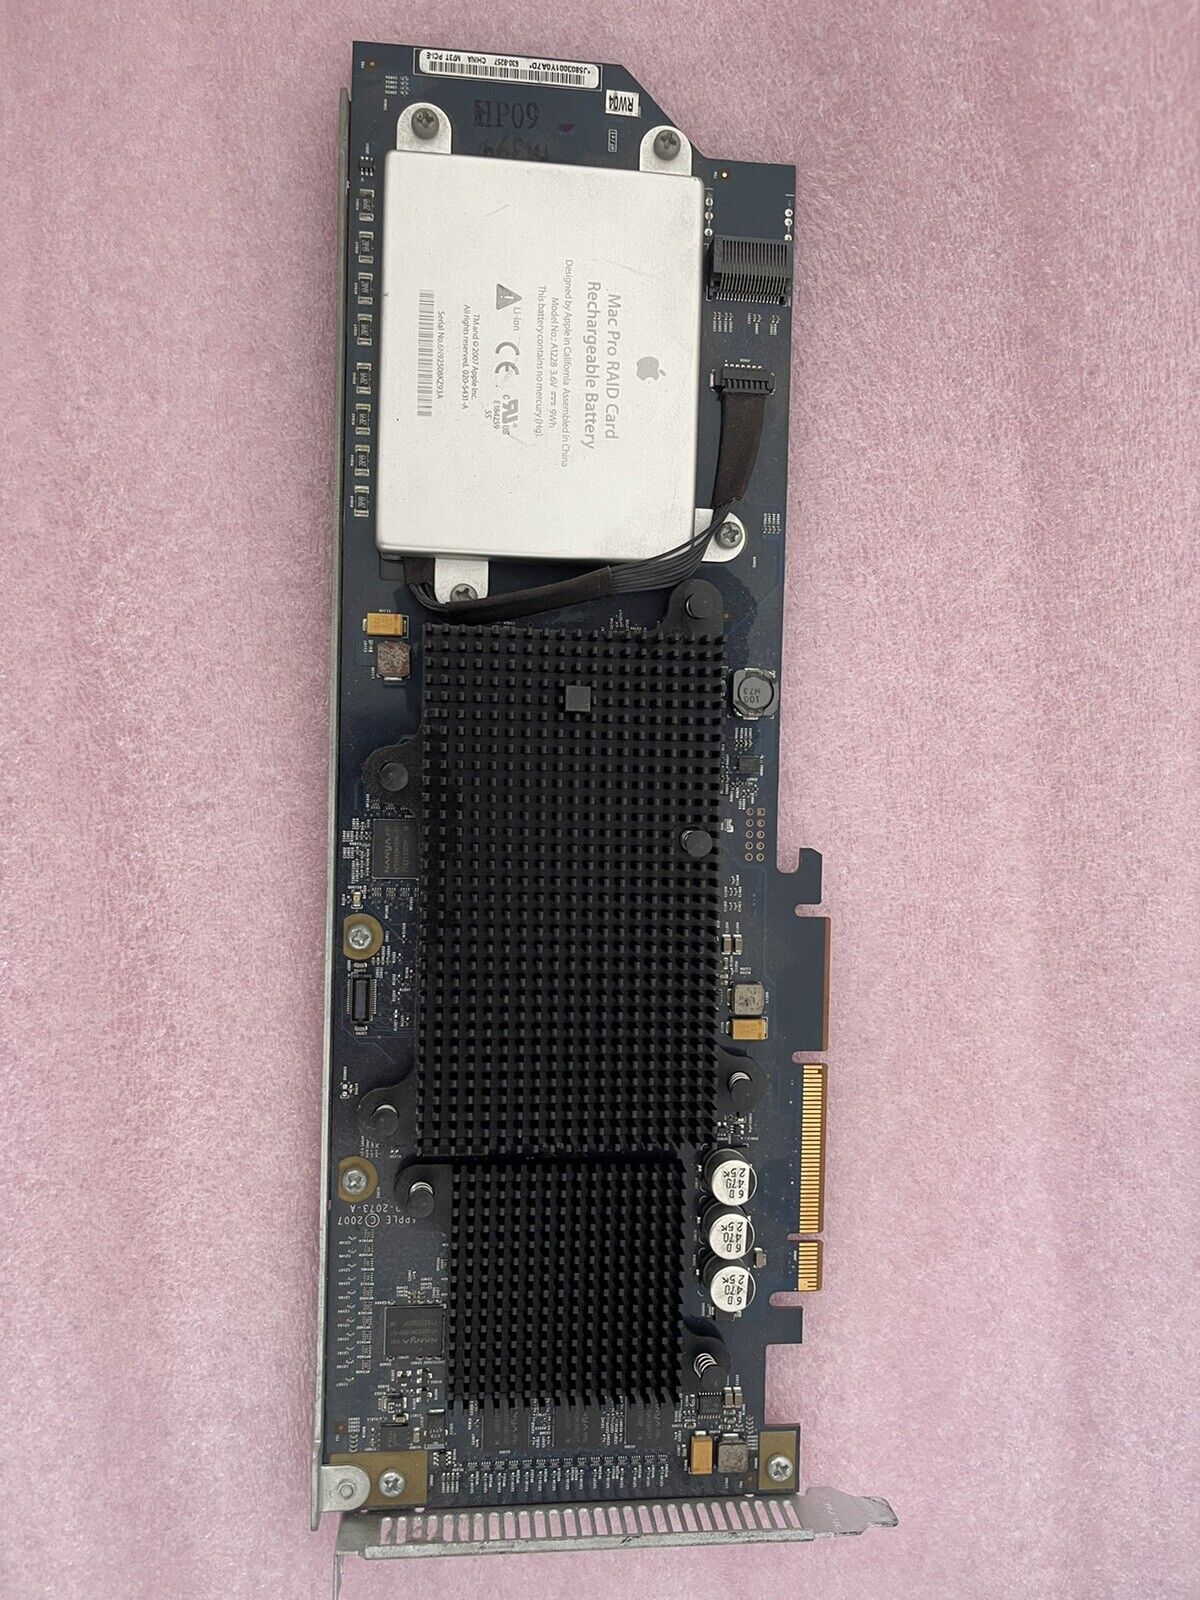 Apple A1247 MacPro 630-9257 PCIe Raid Card w/ Apple A1228 Rechargeable Battery